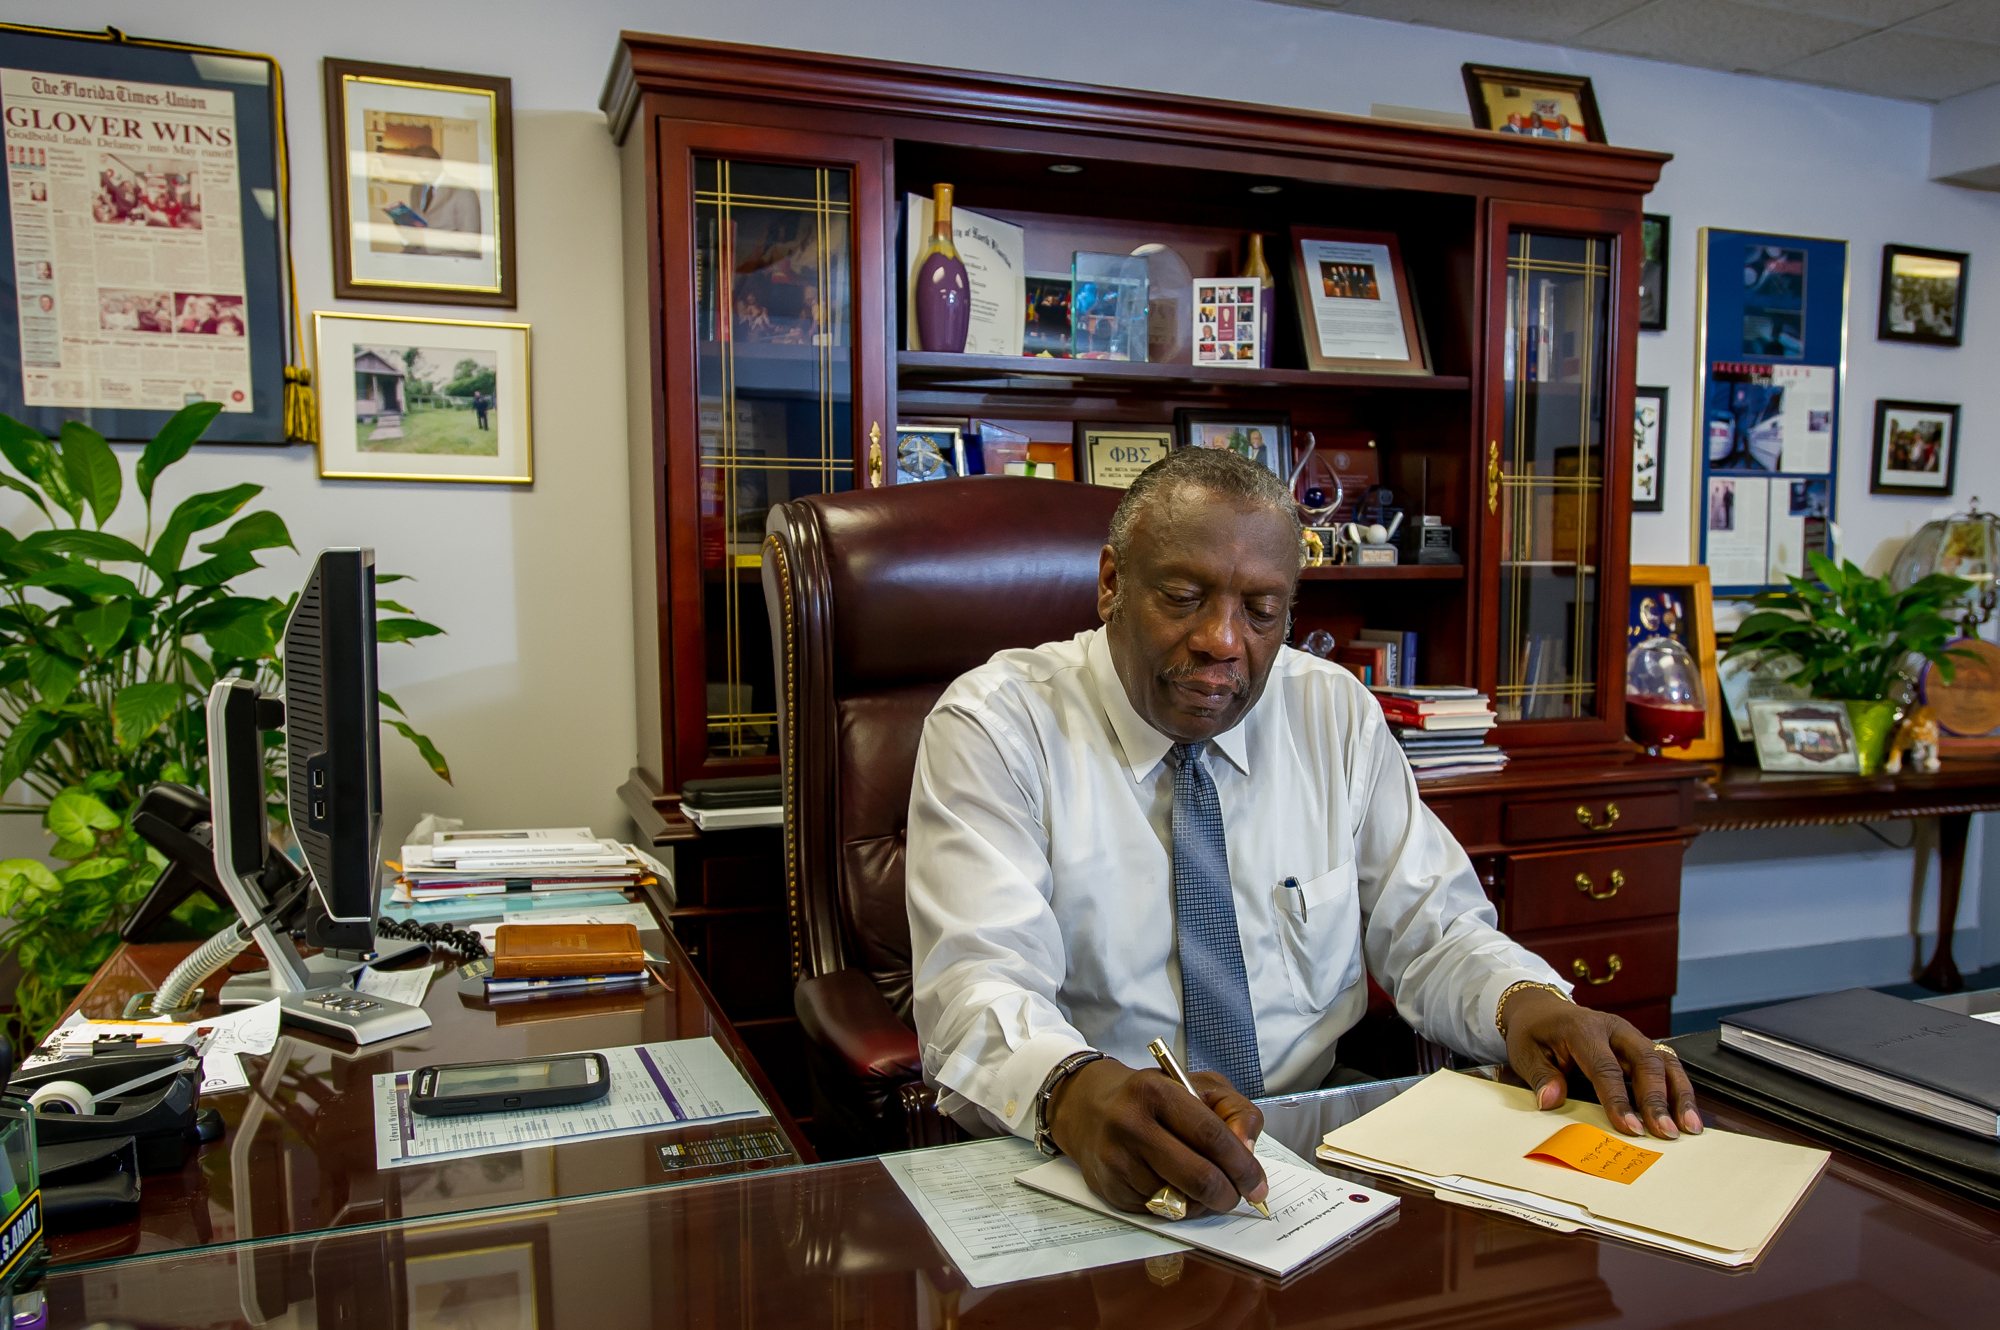 Edward Waters College President Nathaniel Glover Jr. is stepping down from the role in May.